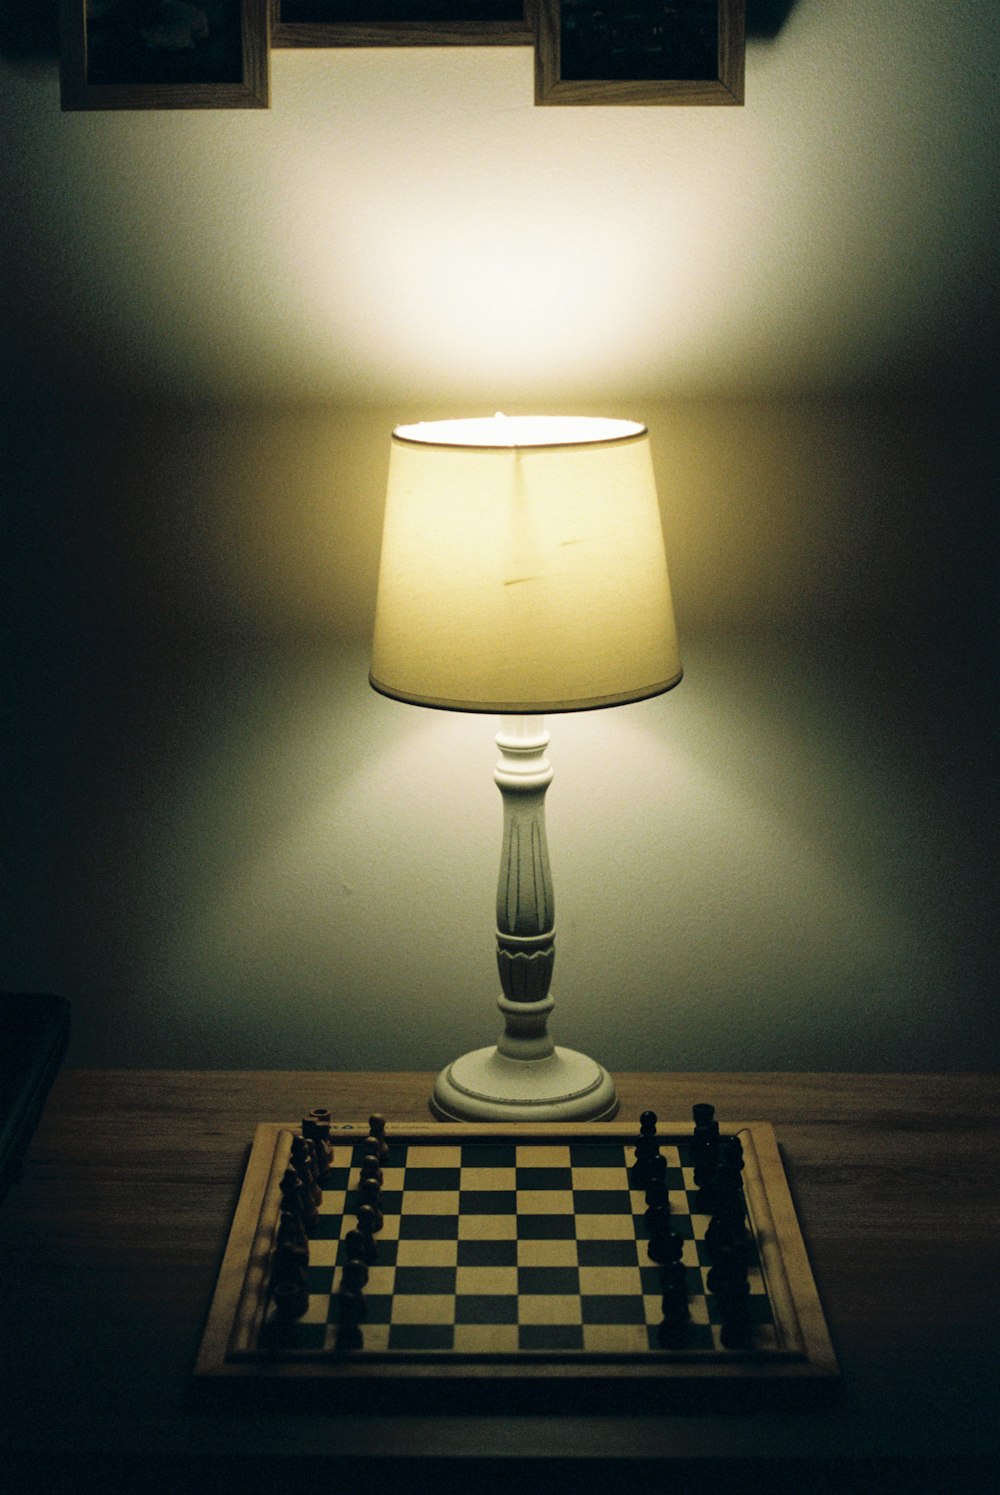 a lamp is lit on a chess board